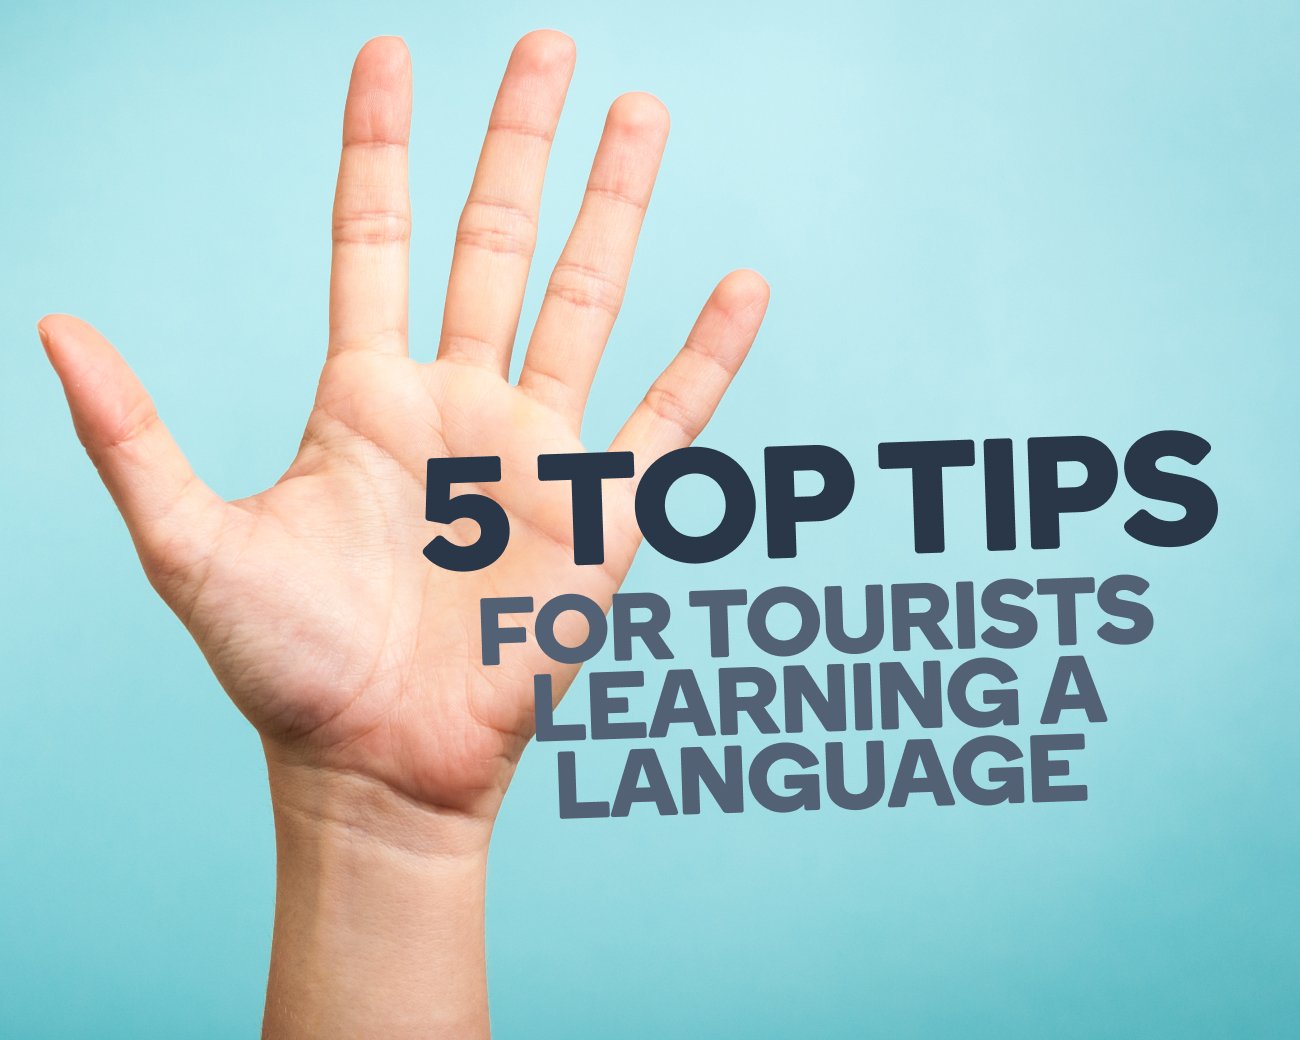 5 Top Tips for Tourists Learning a Language